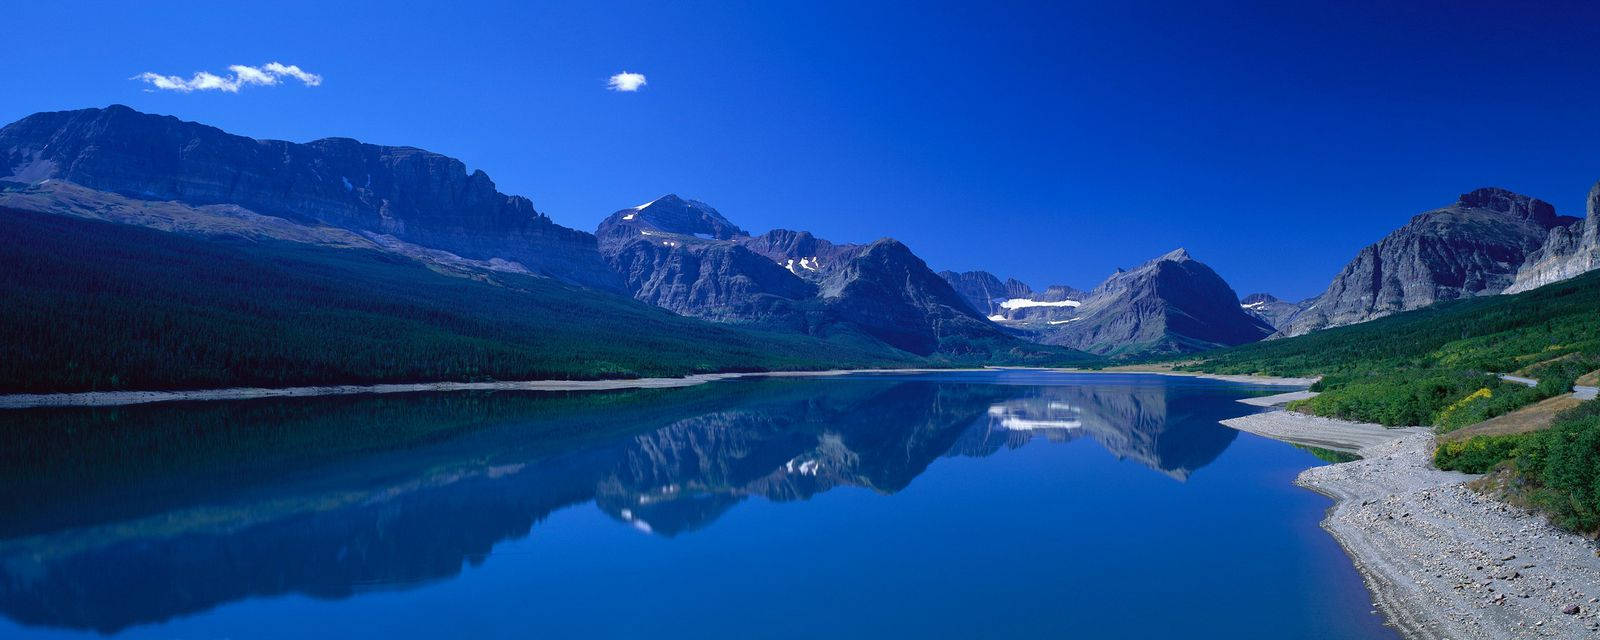 Blue Lake And Mountains For Monitor Wallpaper